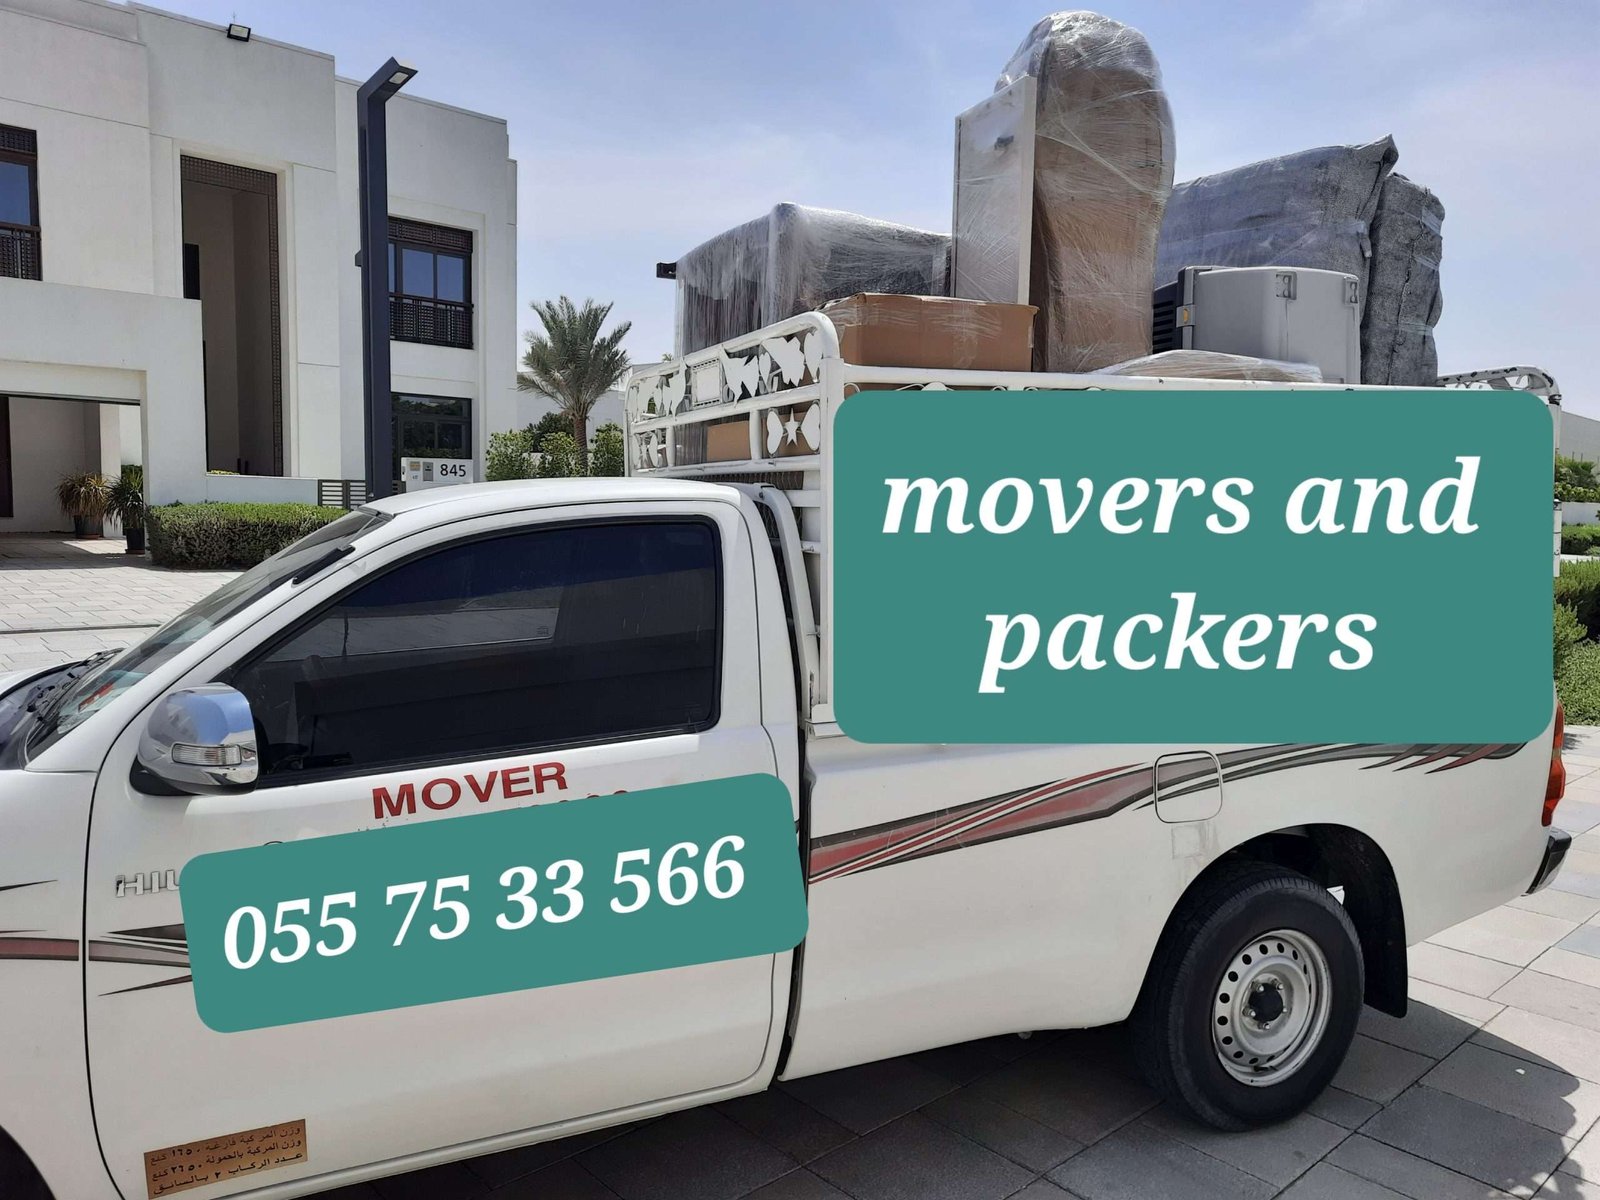 MOVERS AND PACKERS PICKUP TRUCK 055 75 33 566